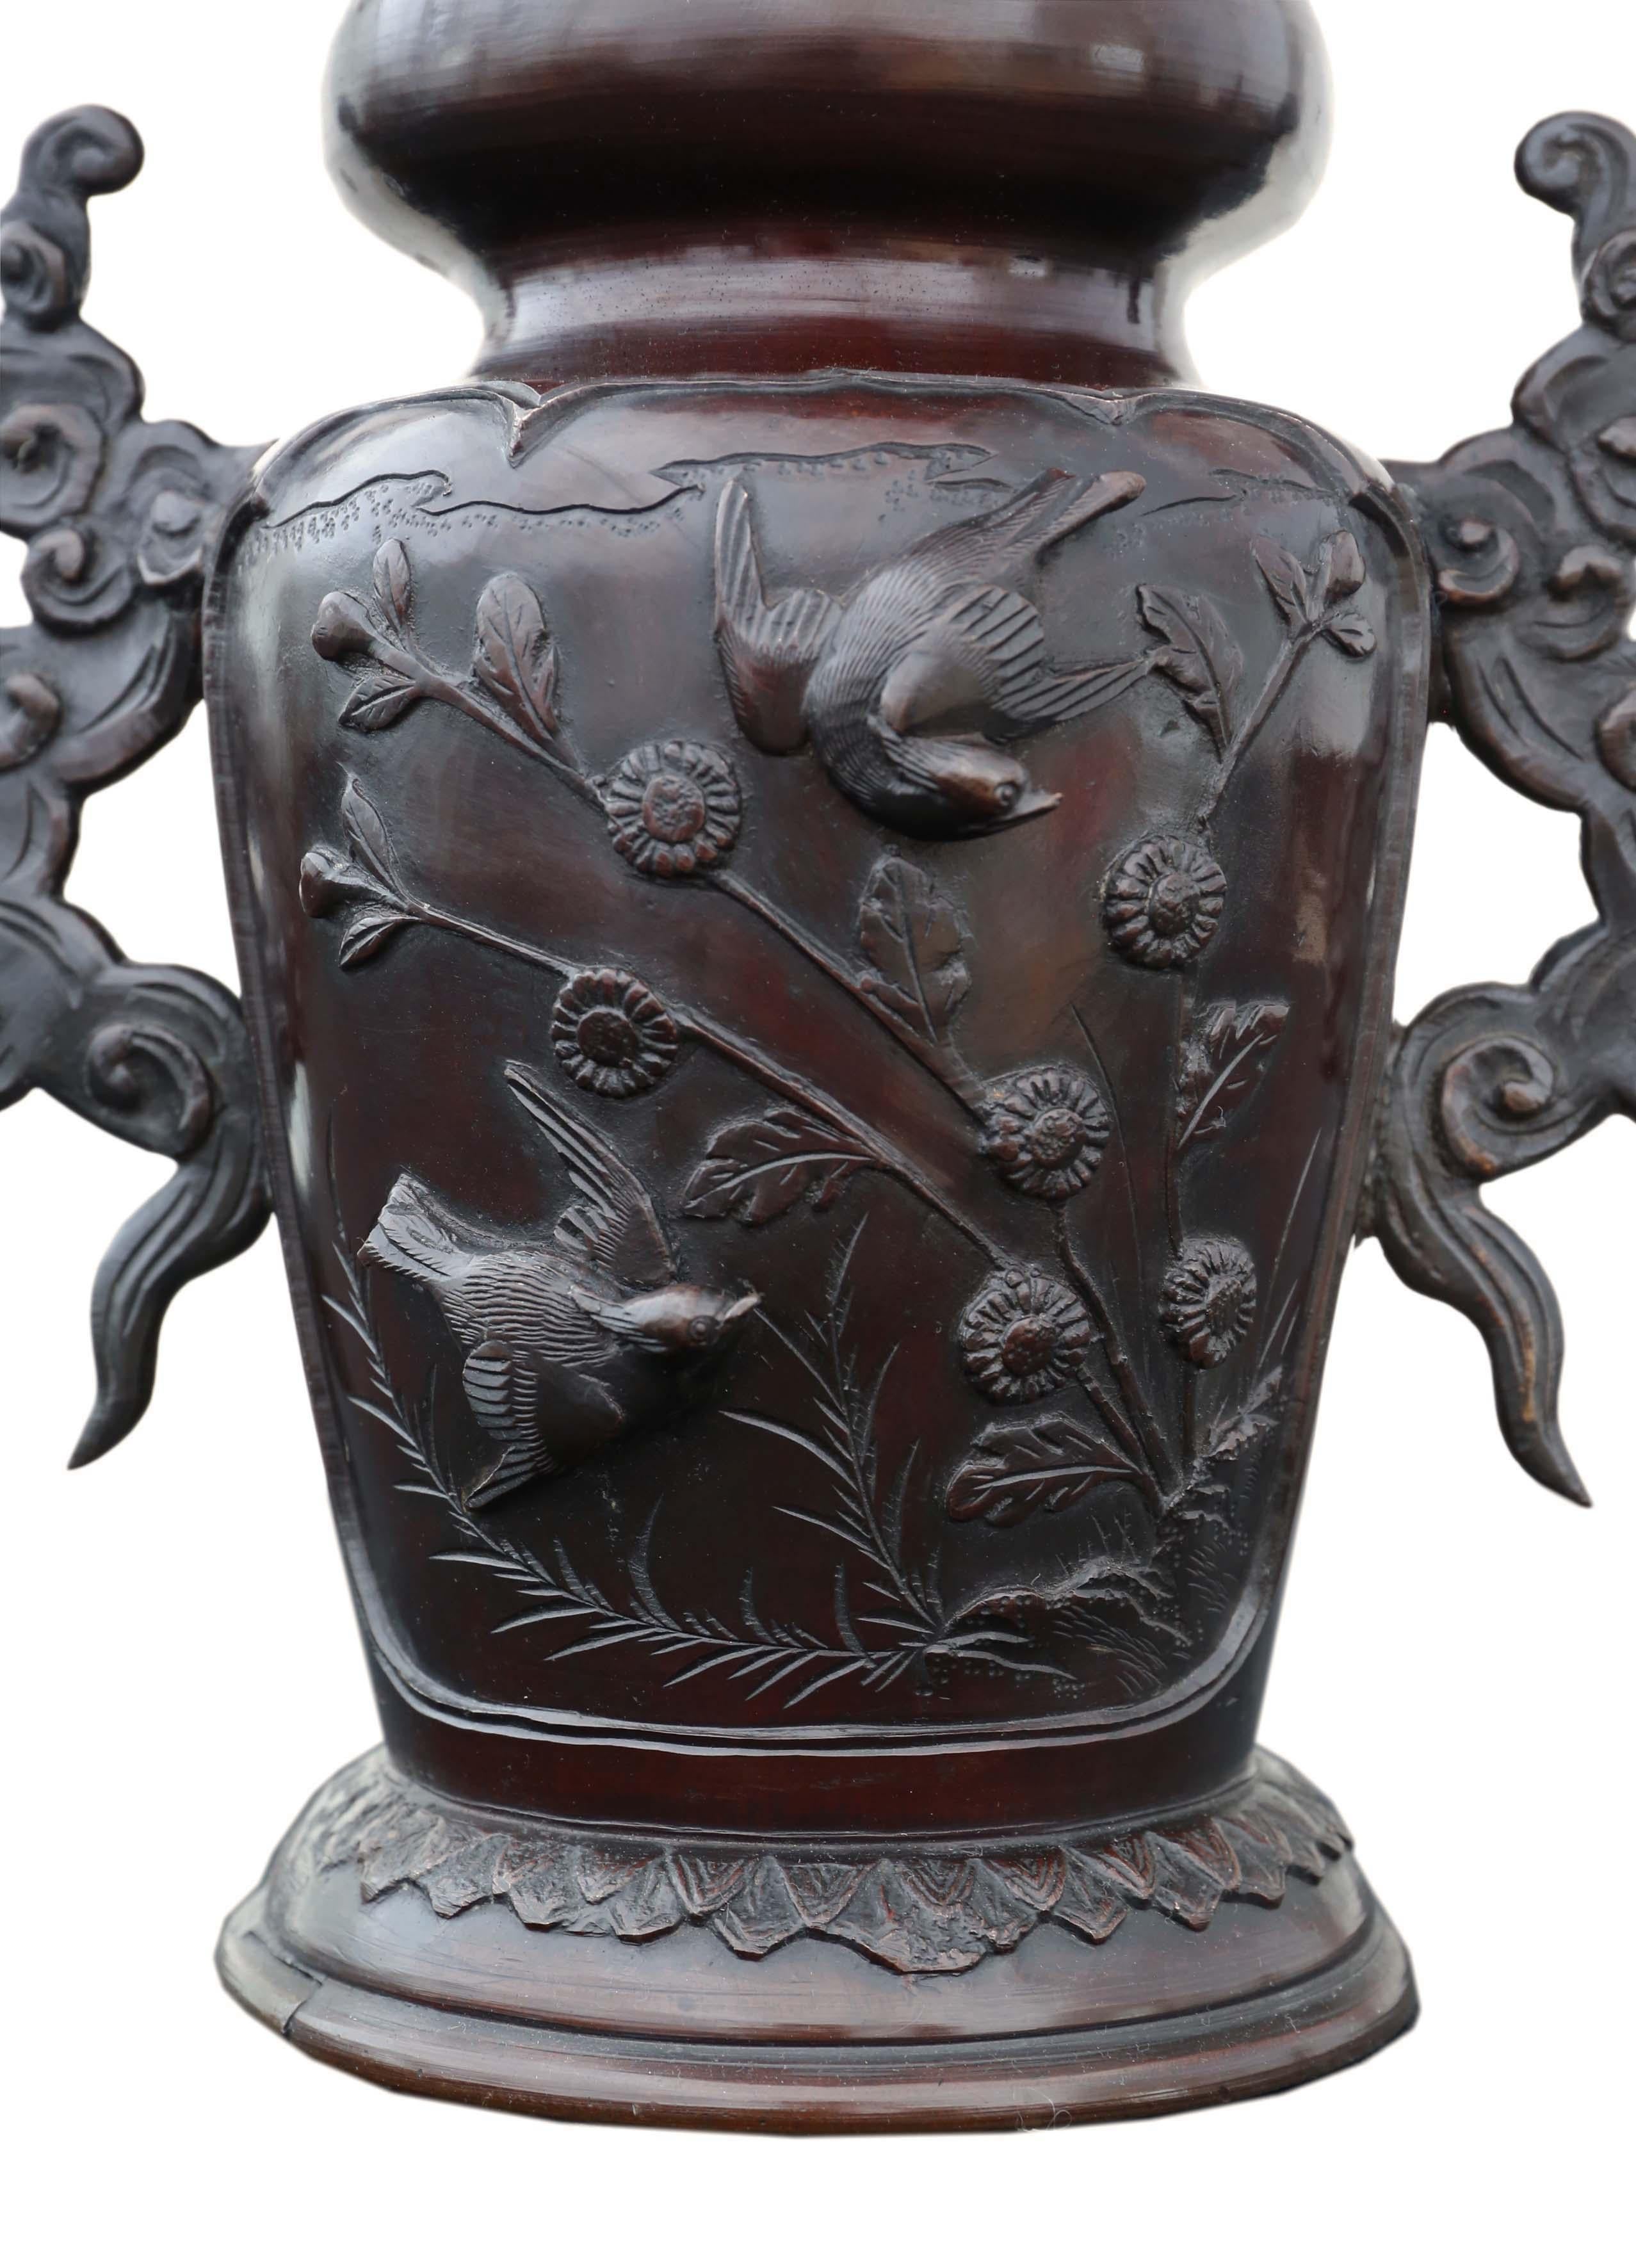 Antique Japanese Bronze Vase Early Meiji Period In Good Condition For Sale In Wisbech, Cambridgeshire